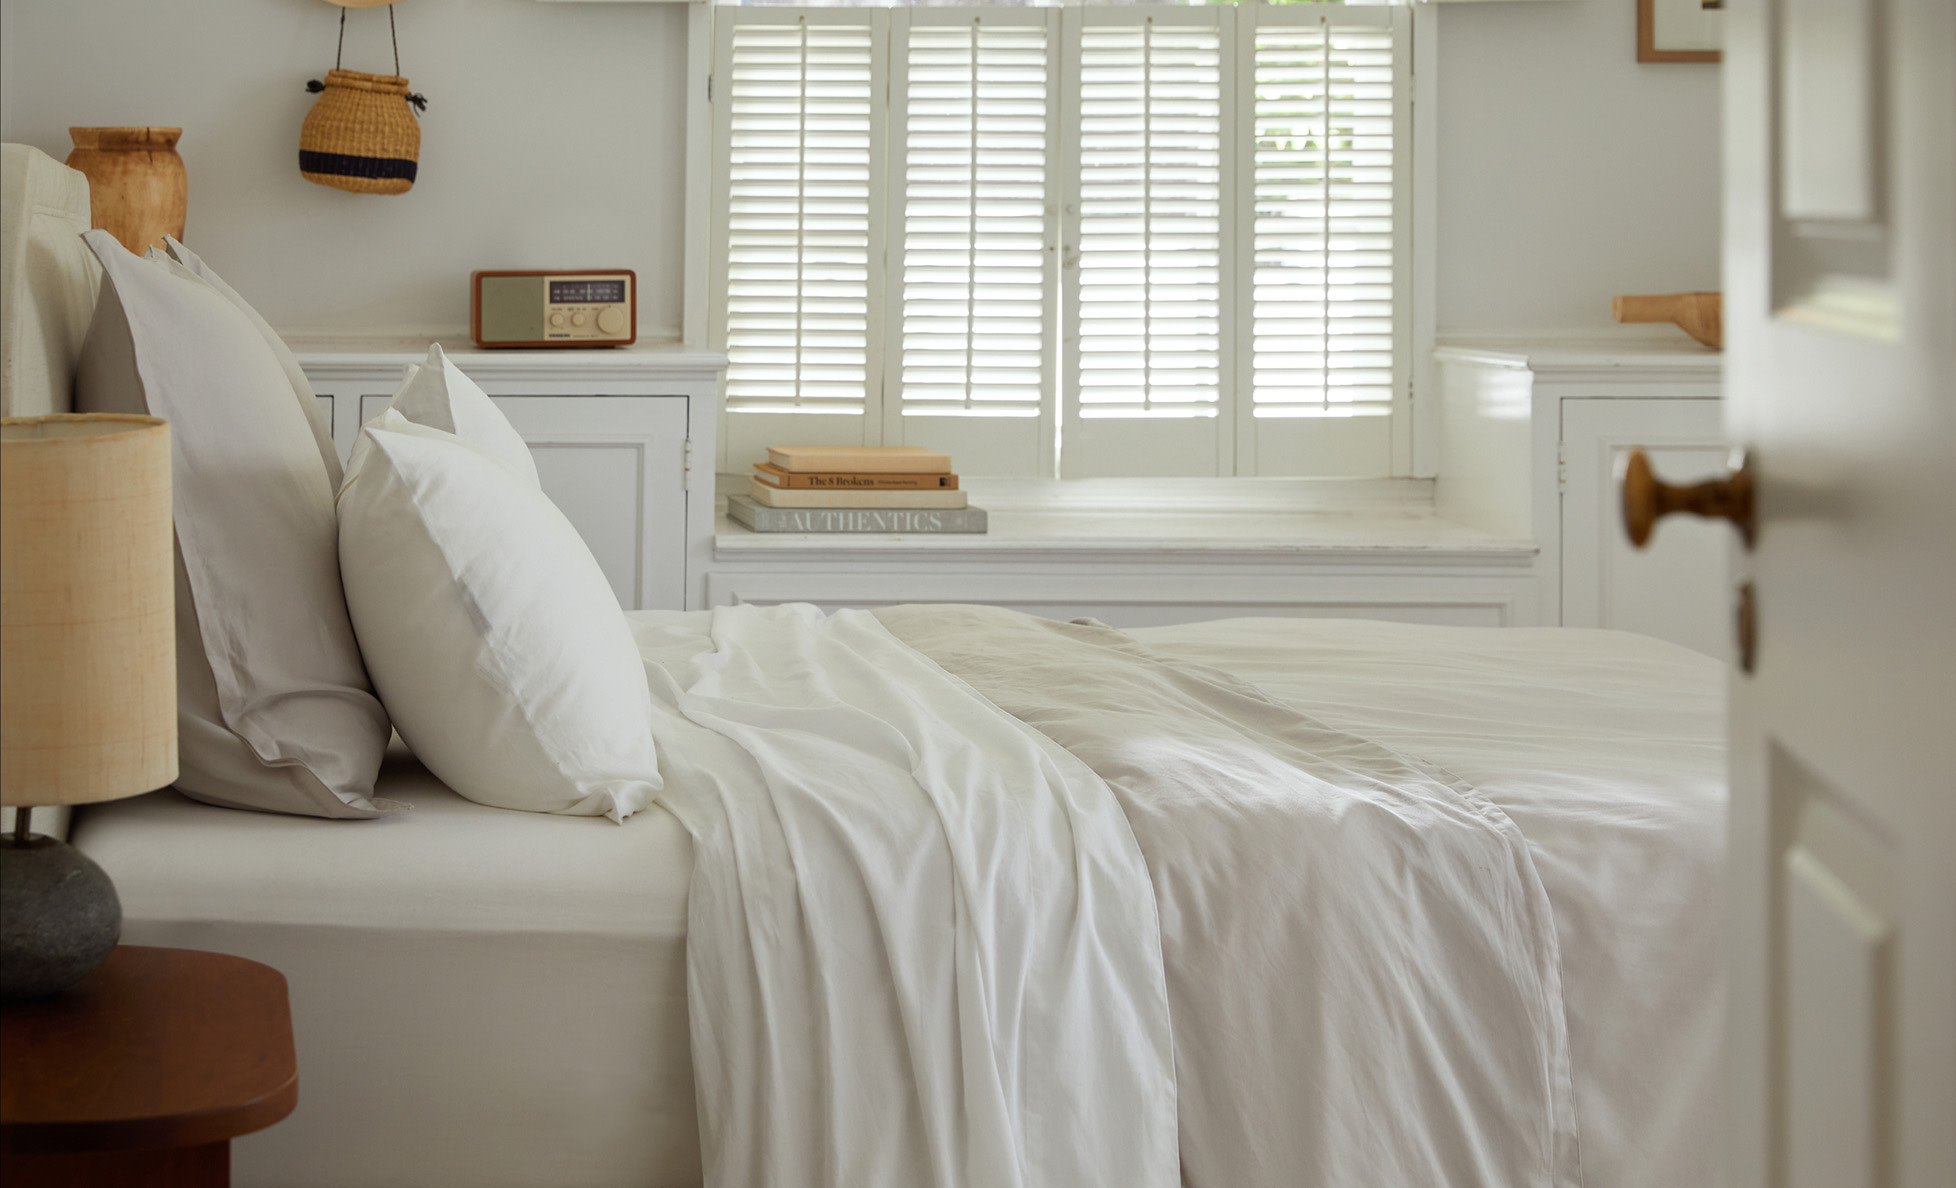 Side view of a bed with white sateen sheets